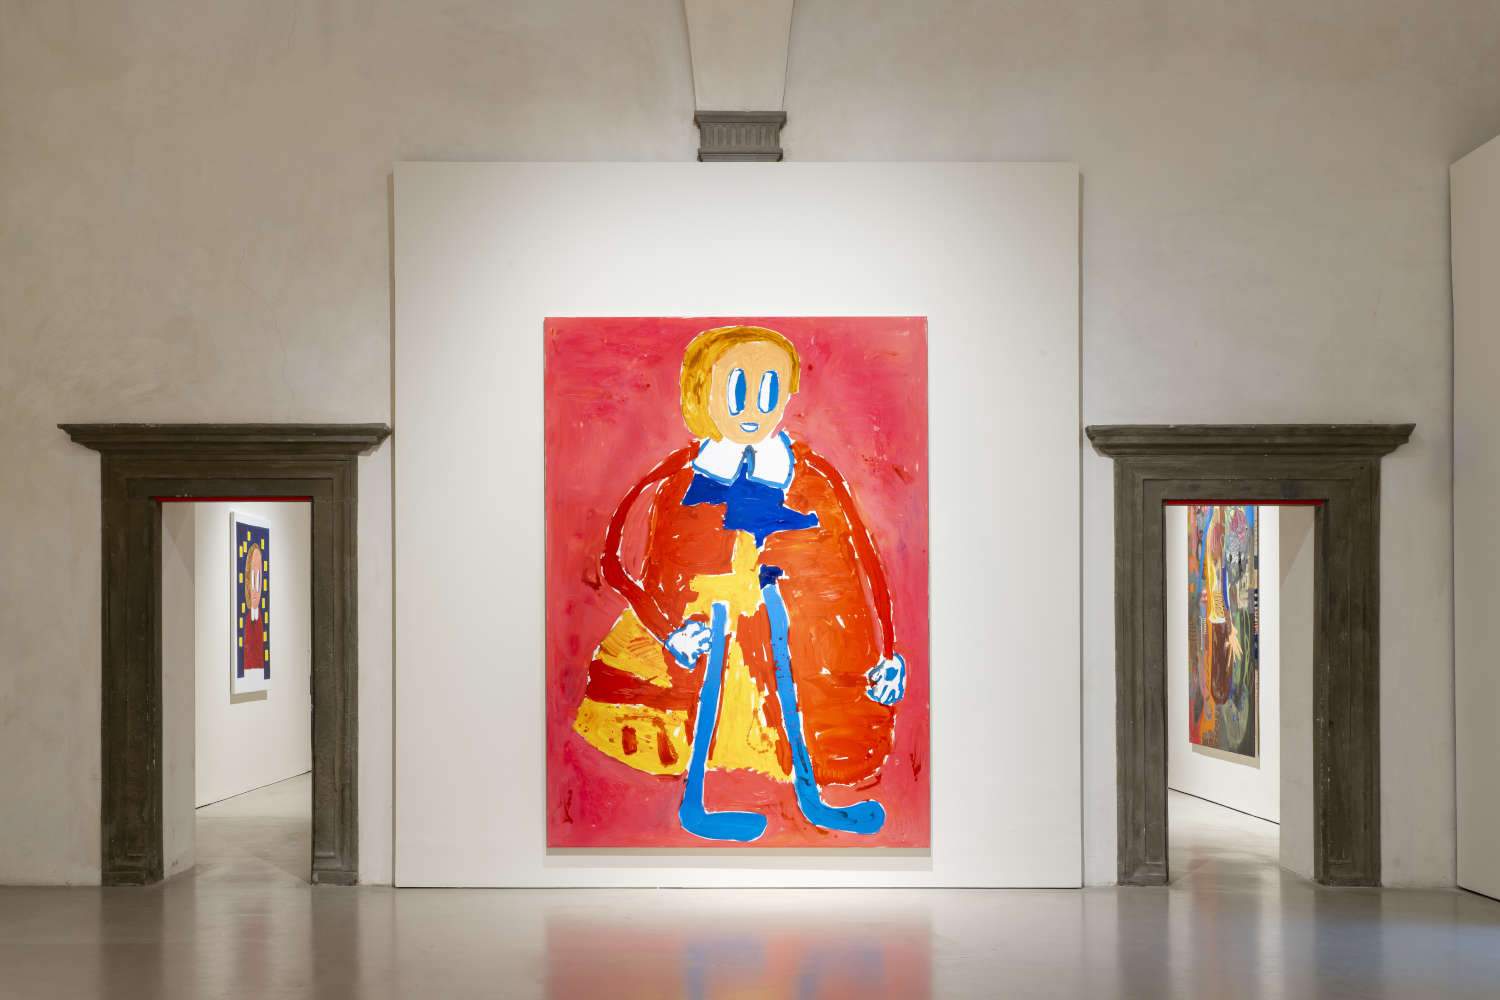 Florence, at the Museo Novecento, AndrÃ© Butzer's major exhibition tracing the artist's career